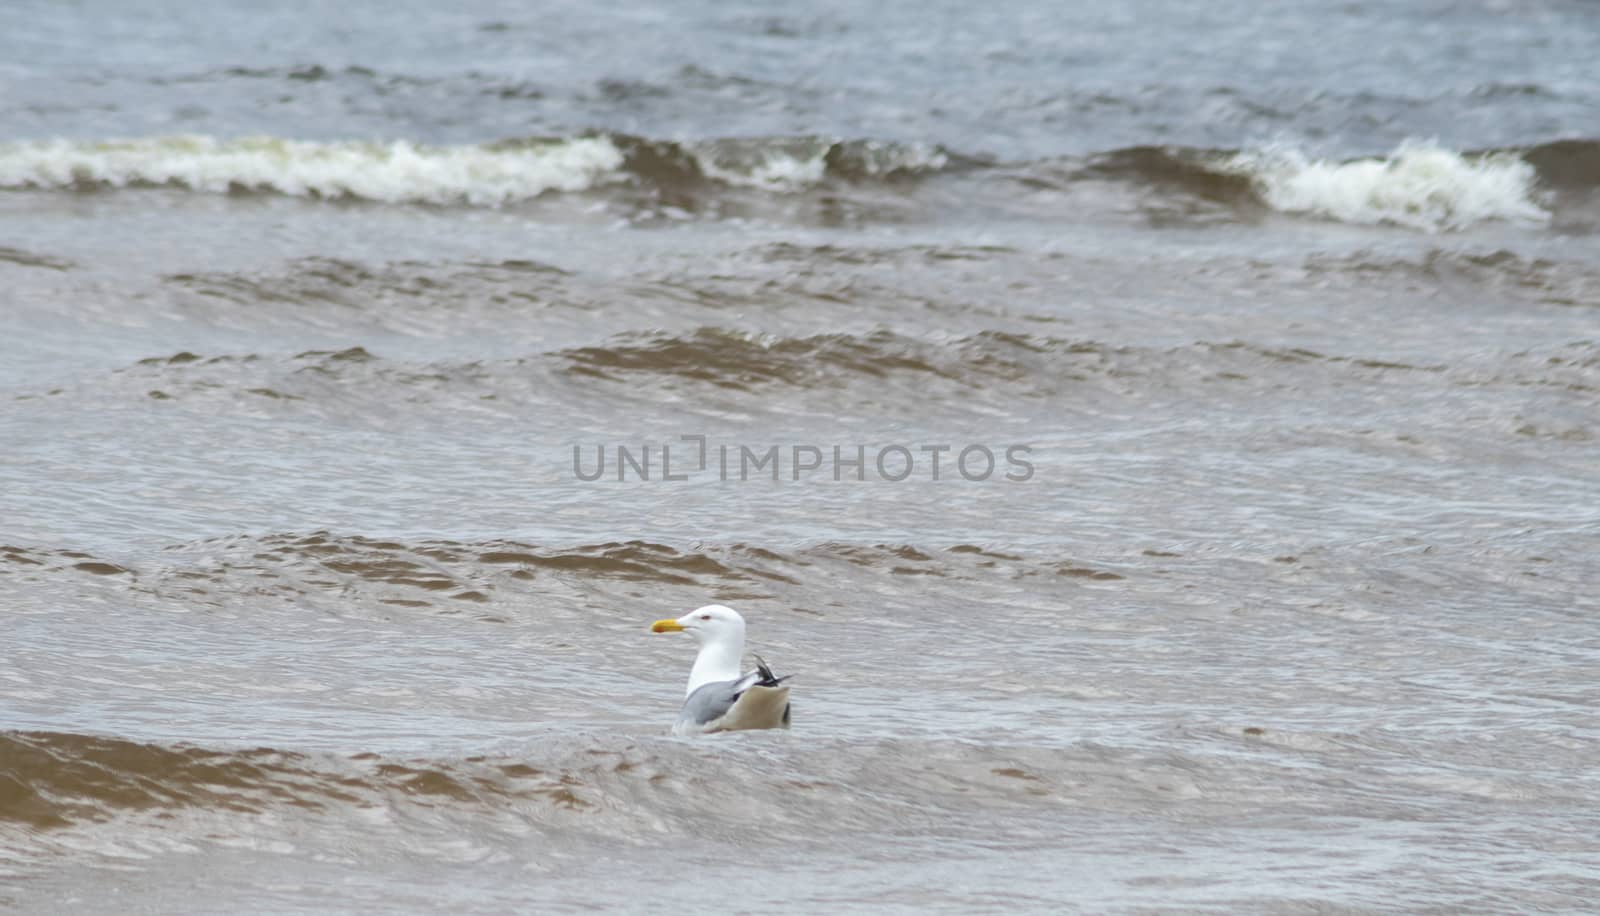 A seagull on the sandy shore of the Baltic Sea in cloudy weather.